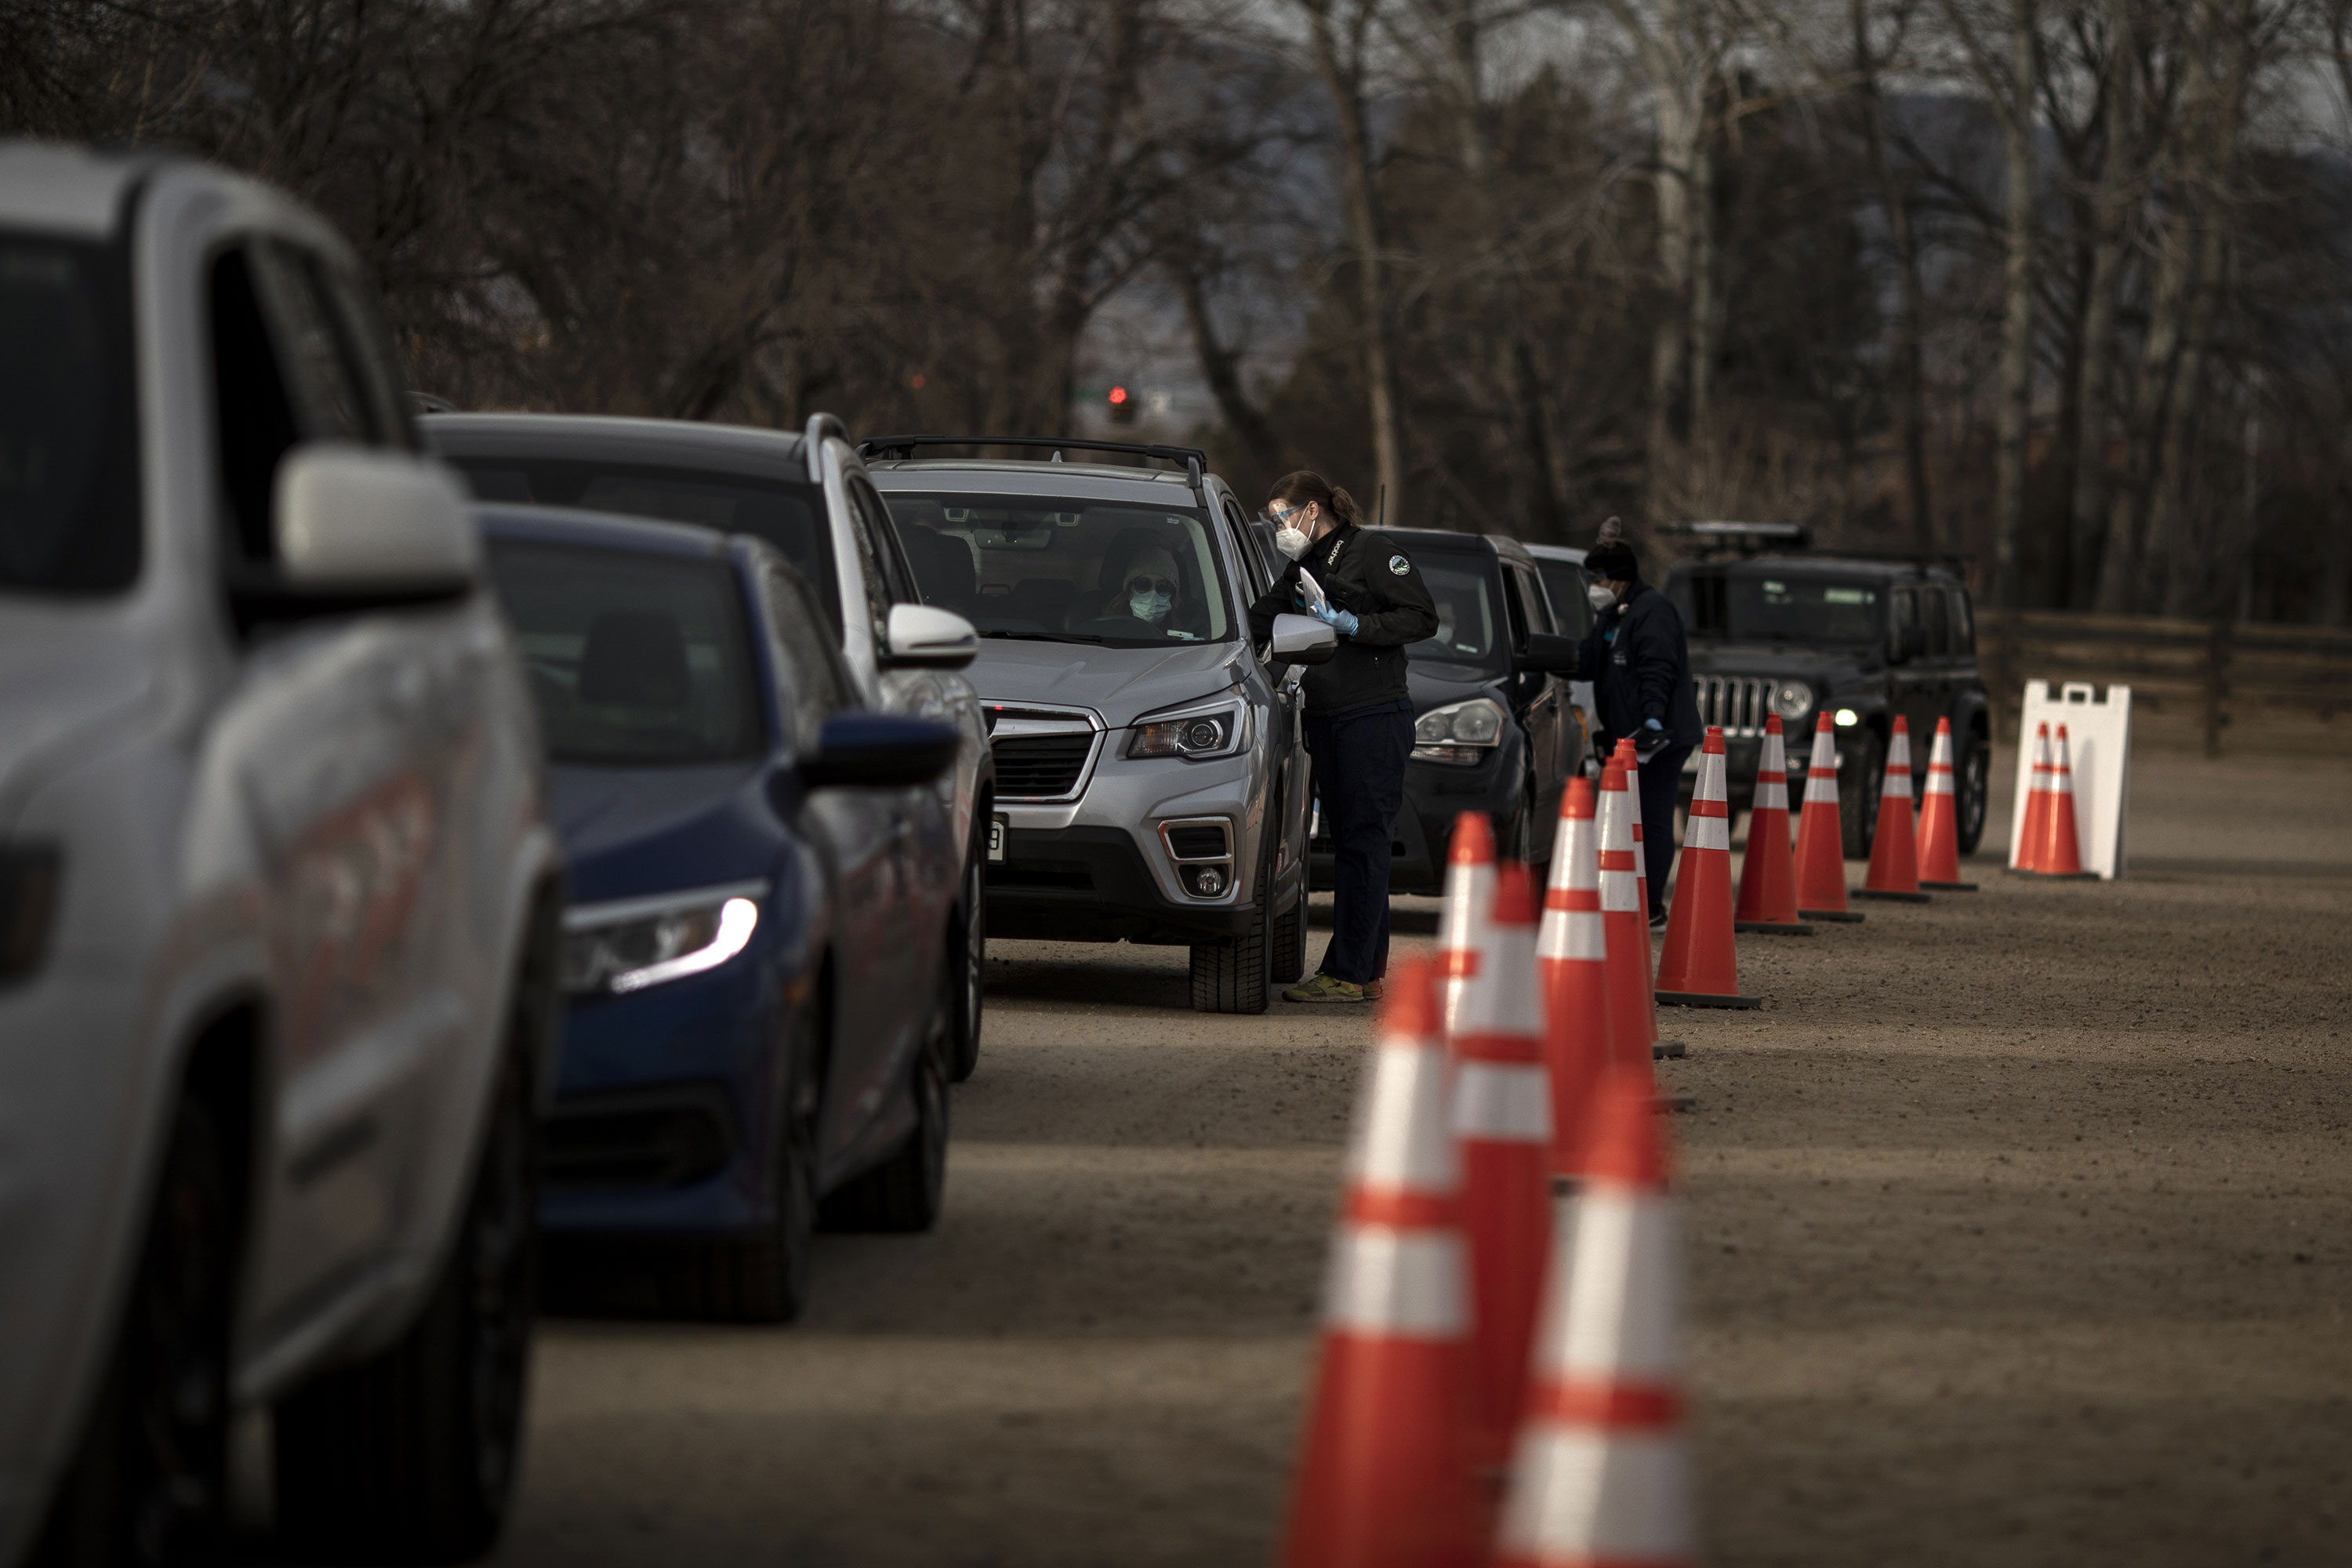 Drivers line up to receive Covid-19 swab tests at a testing site in Longmont, Colorado, on December 14.